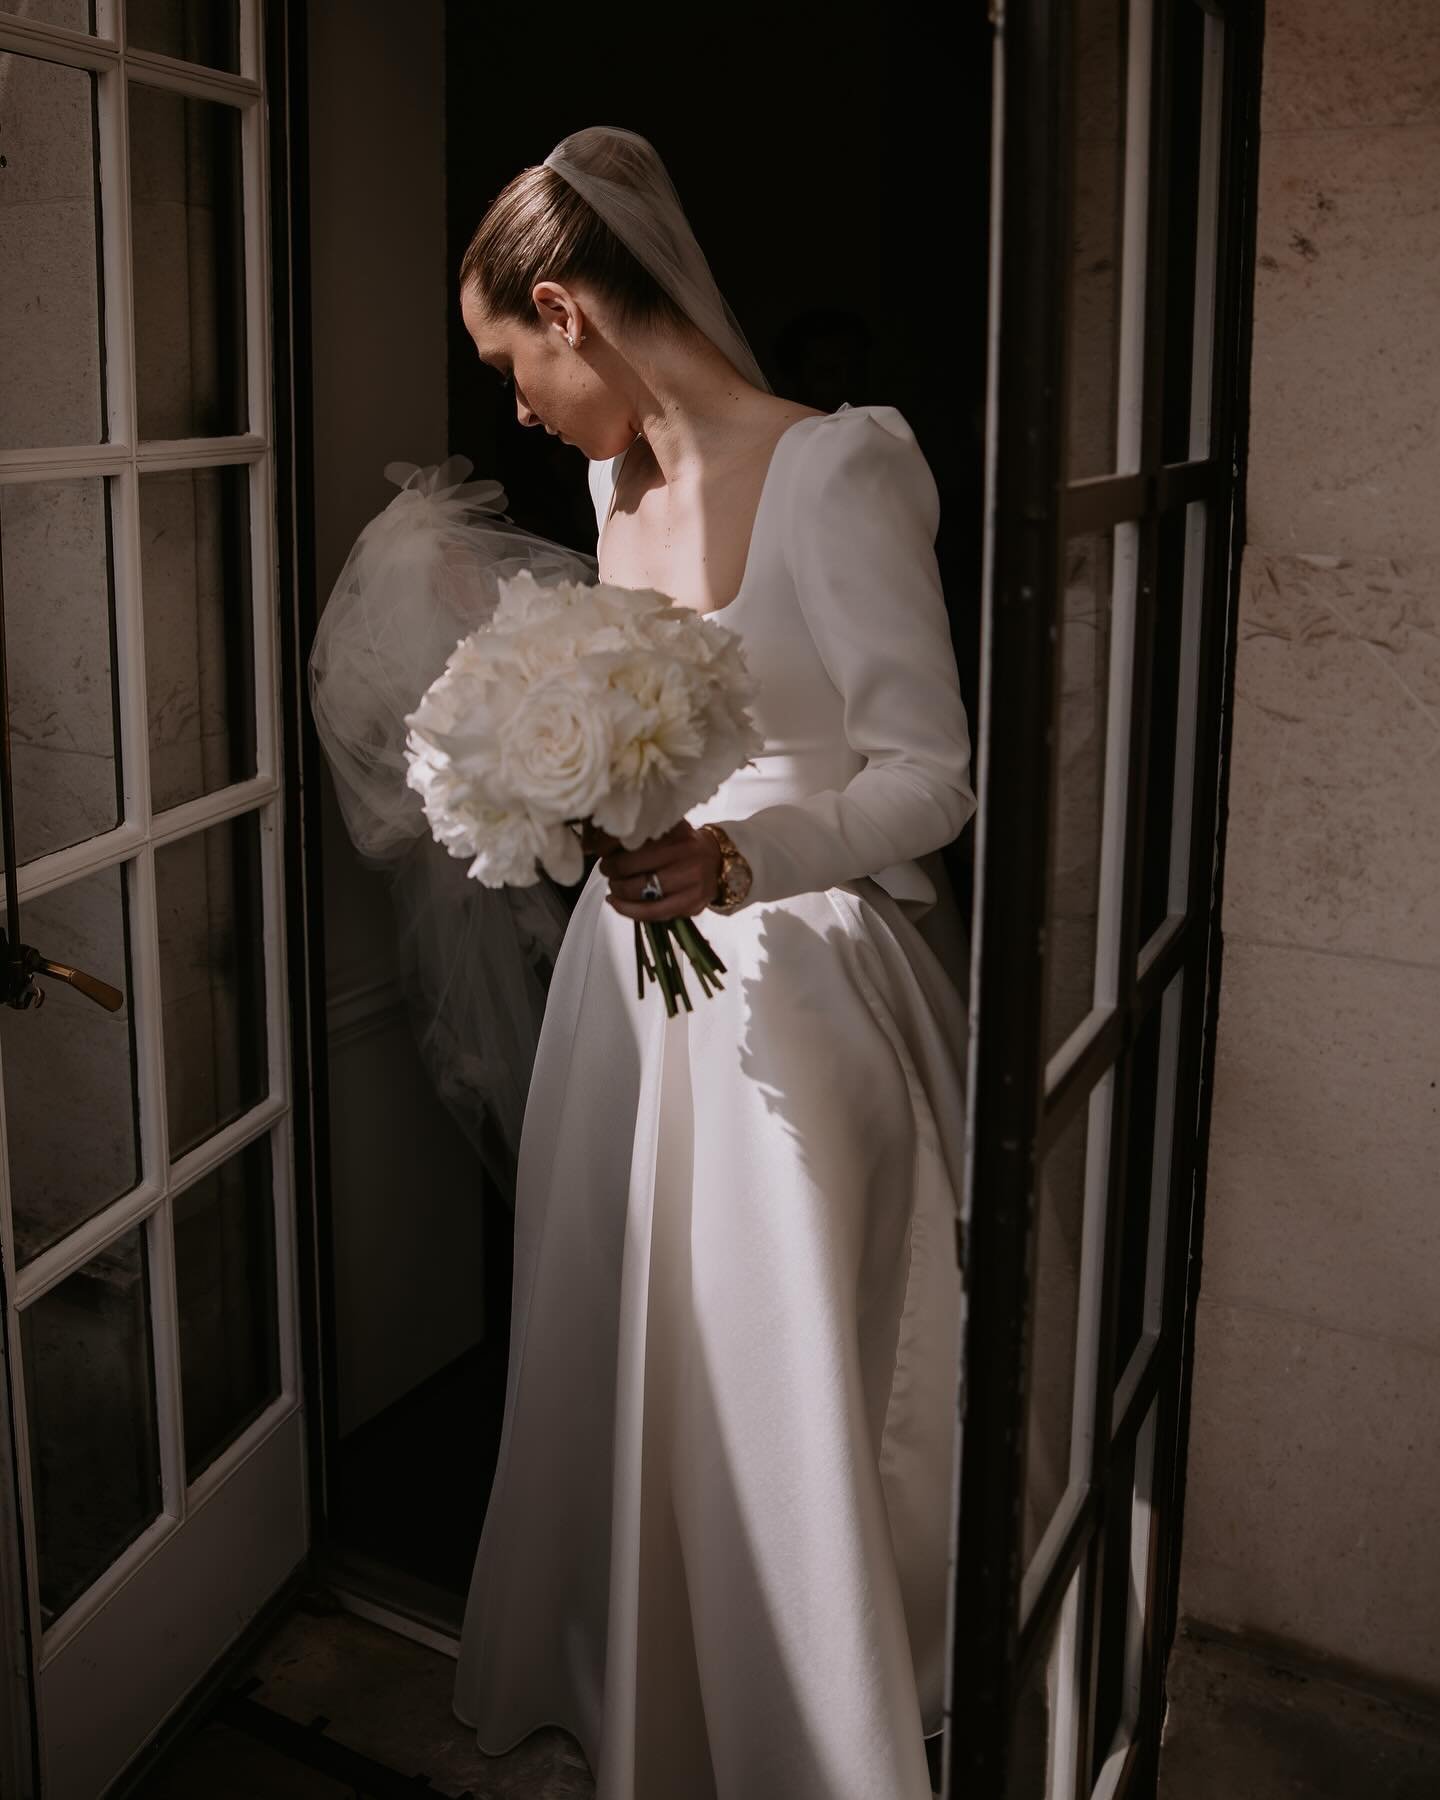 Beautiful bride Rosie married her new husband Joe in a classic black tie ceremony recently and we couldn&rsquo;t wait to share a sneak peek. The Foxglove dress and Ellie skirt combo was the perfect choice for this London wedding.

Huge congratulation